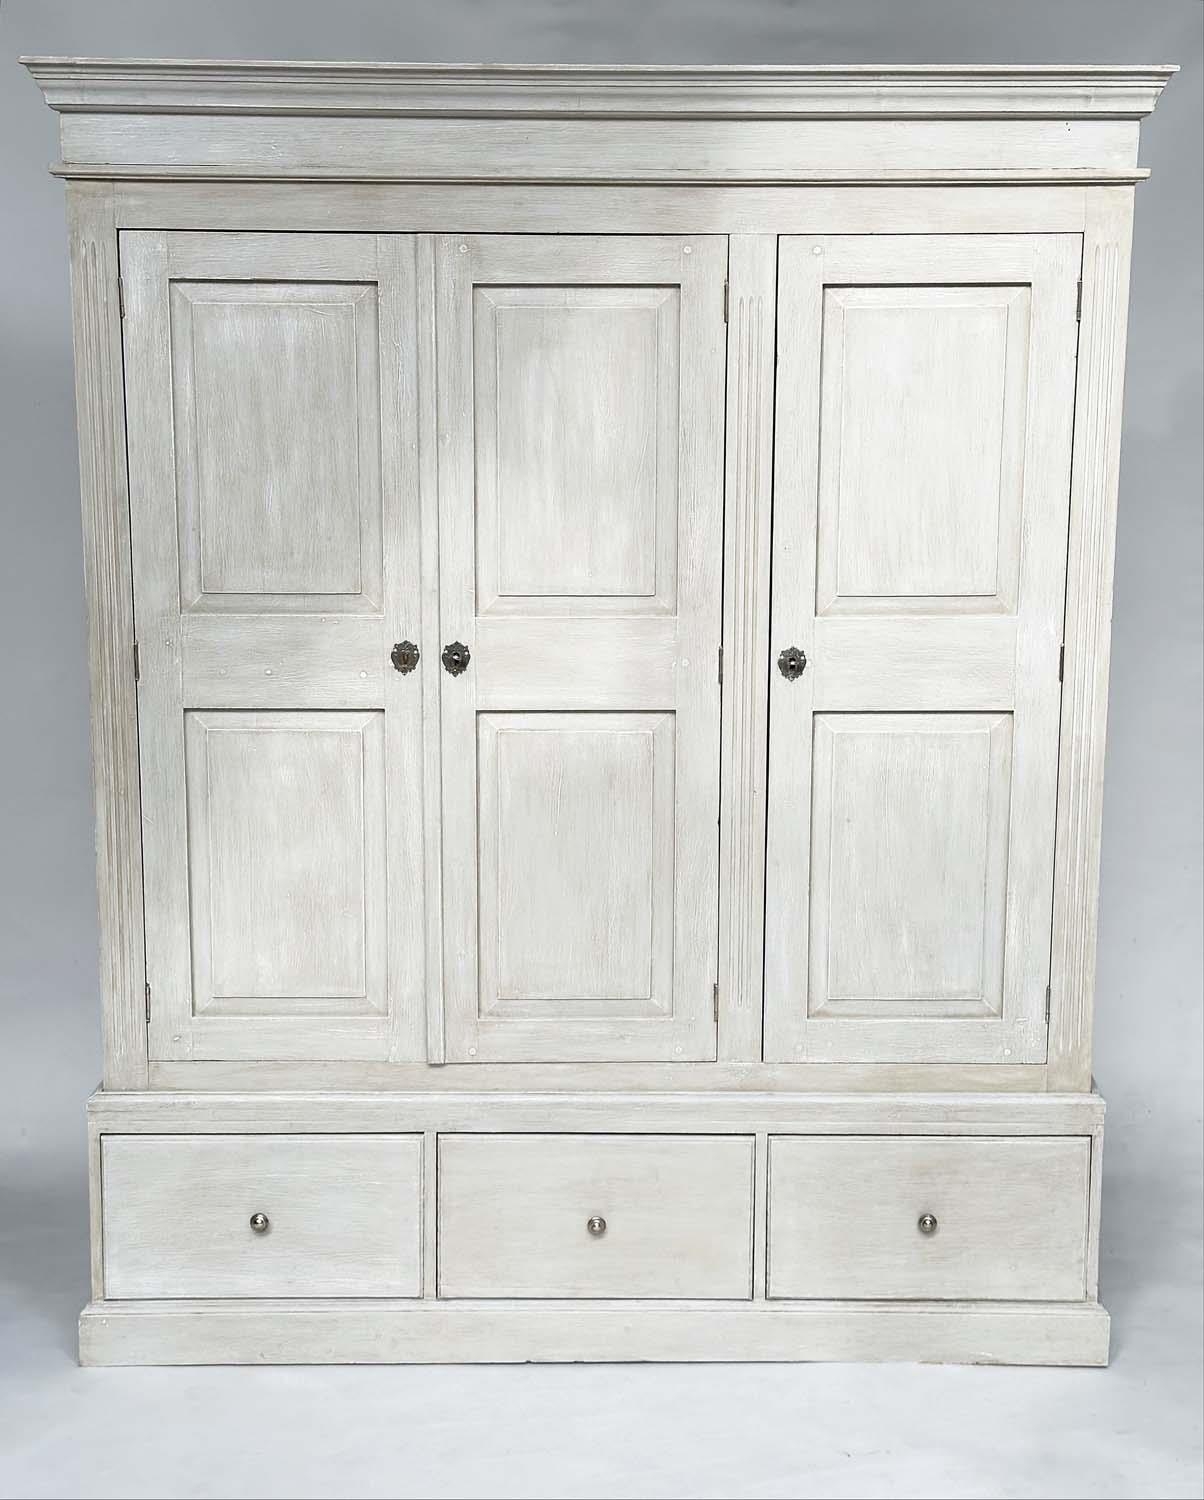 ARMOIRE, French style traditionally grey painted with three panelled doors, enclosing hanging above.